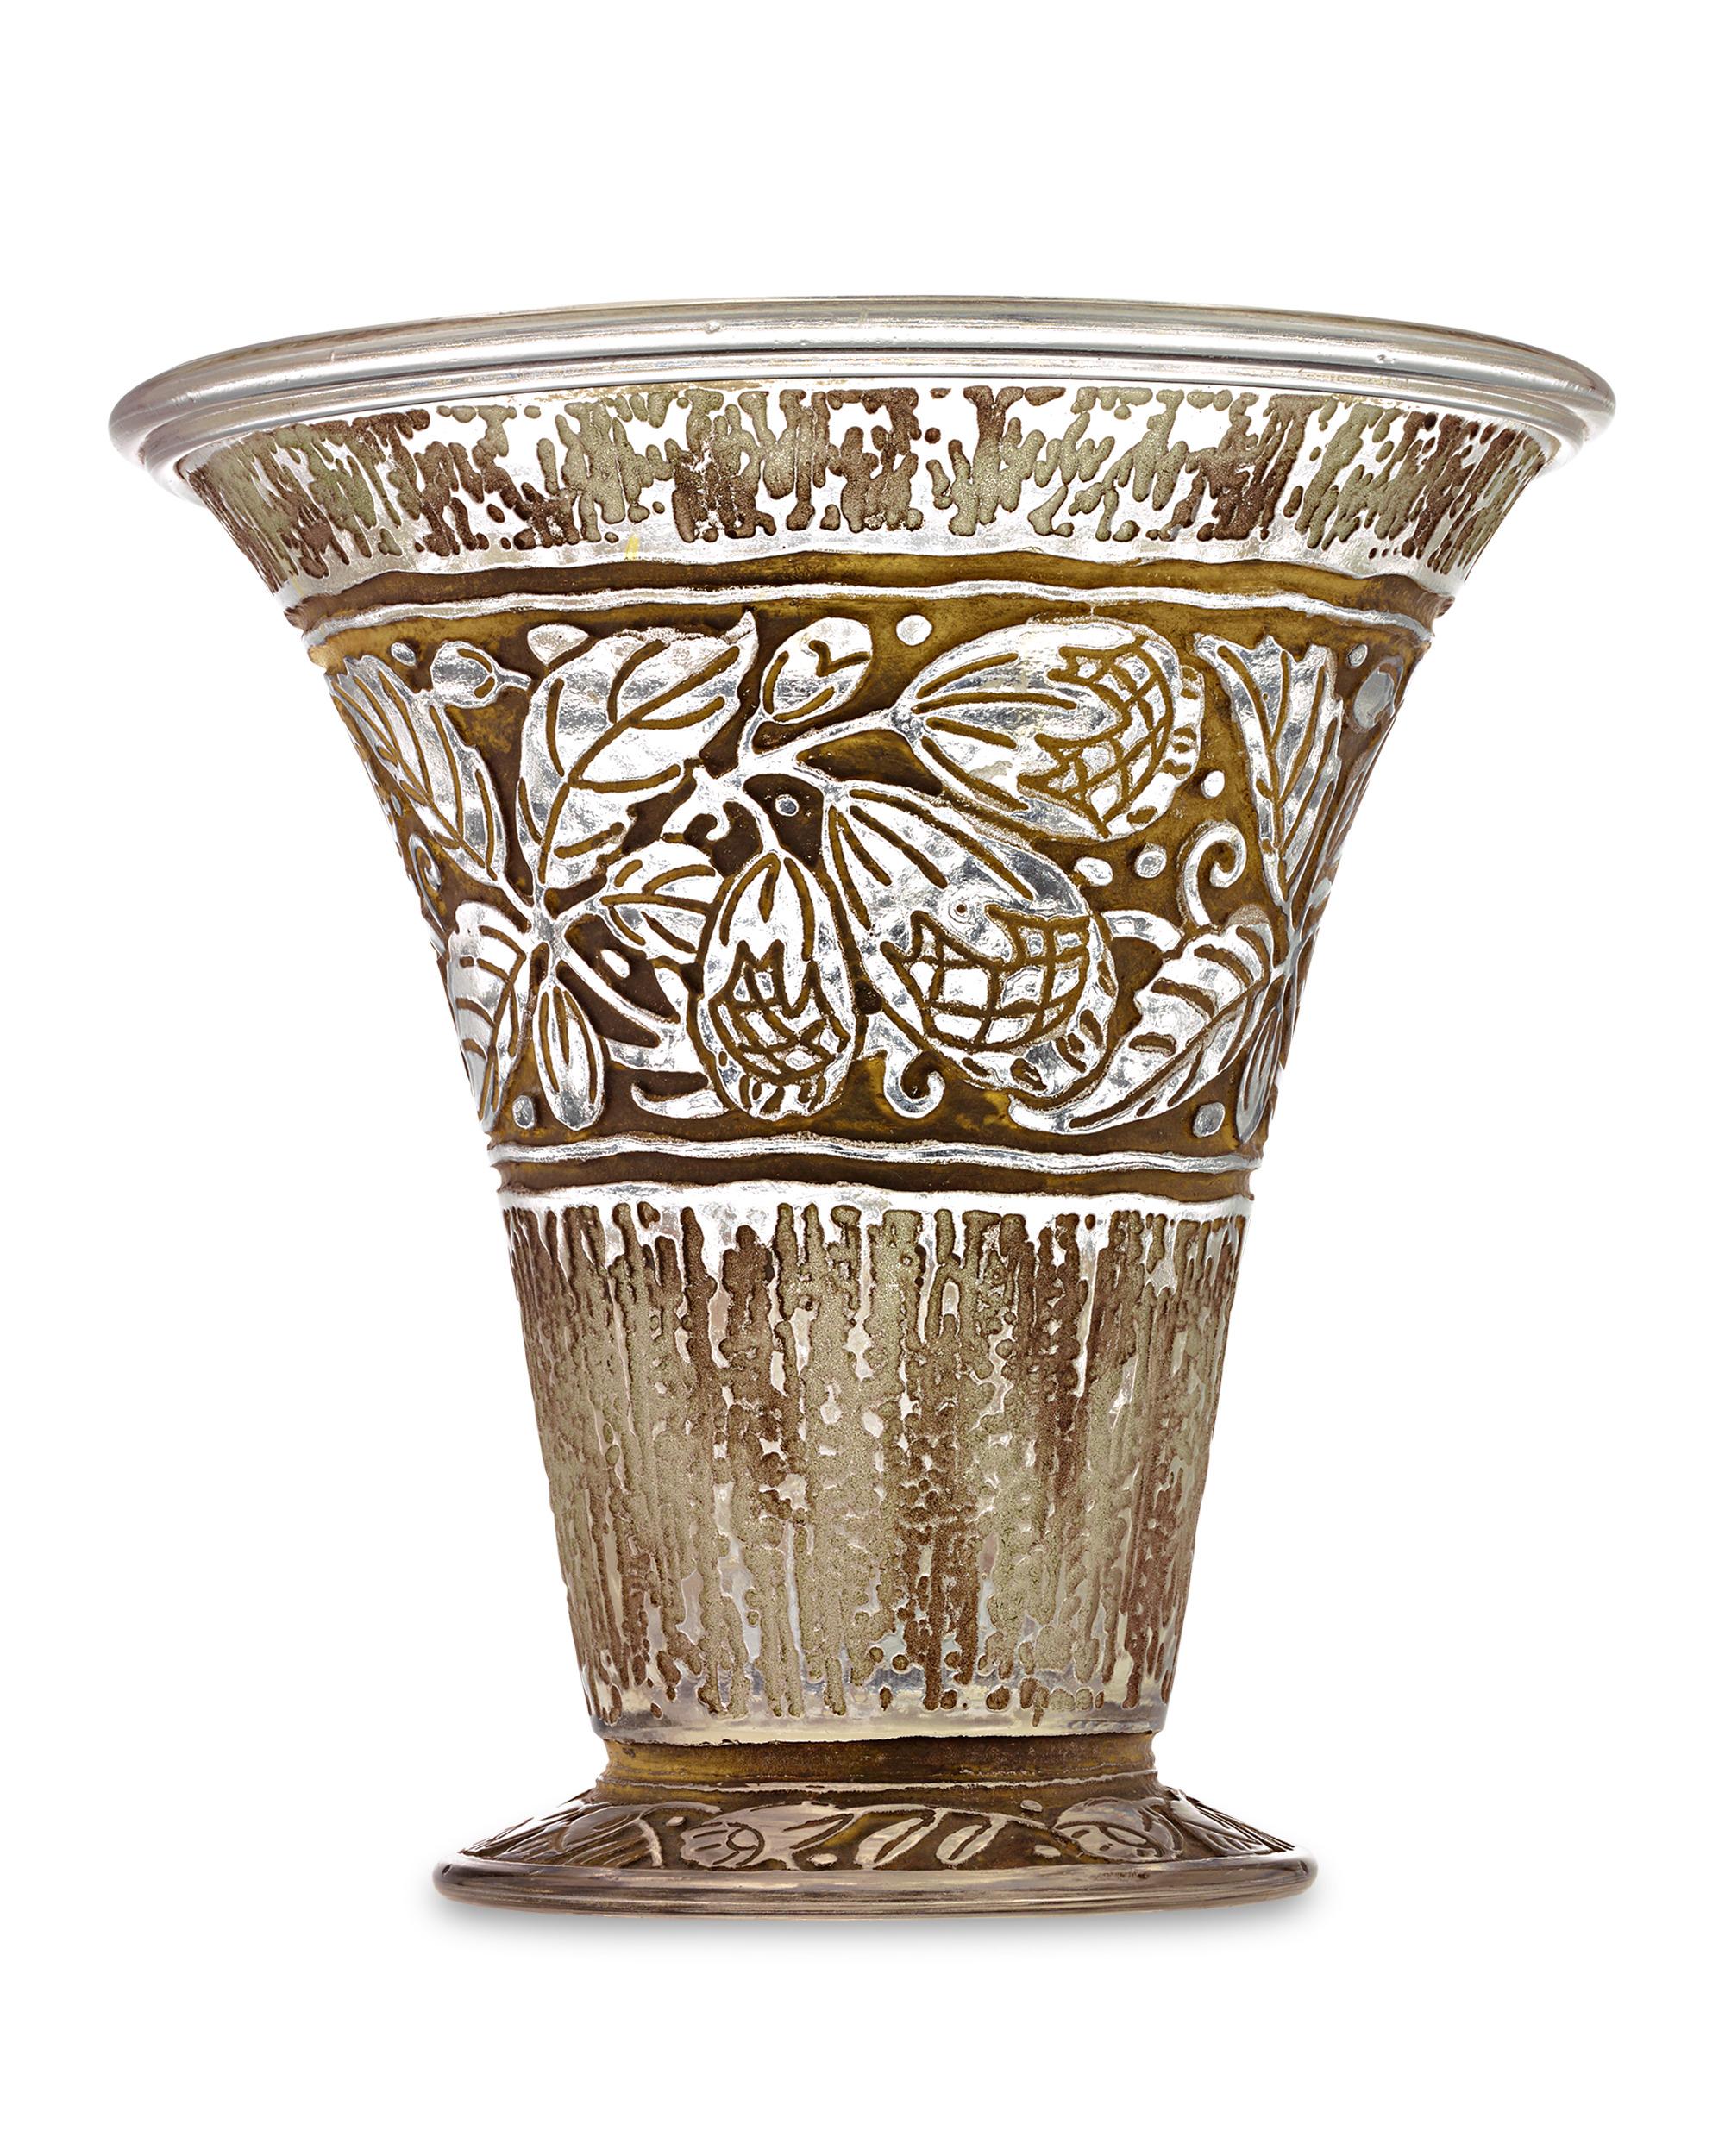 This Daum Nancy acid-etched glass vase represents an exceptionally rare and particularly graceful model from the renowned French firm. The glassmakers of Daum Nancy have long been celebrated for their masterful ability to recreate the beauty of